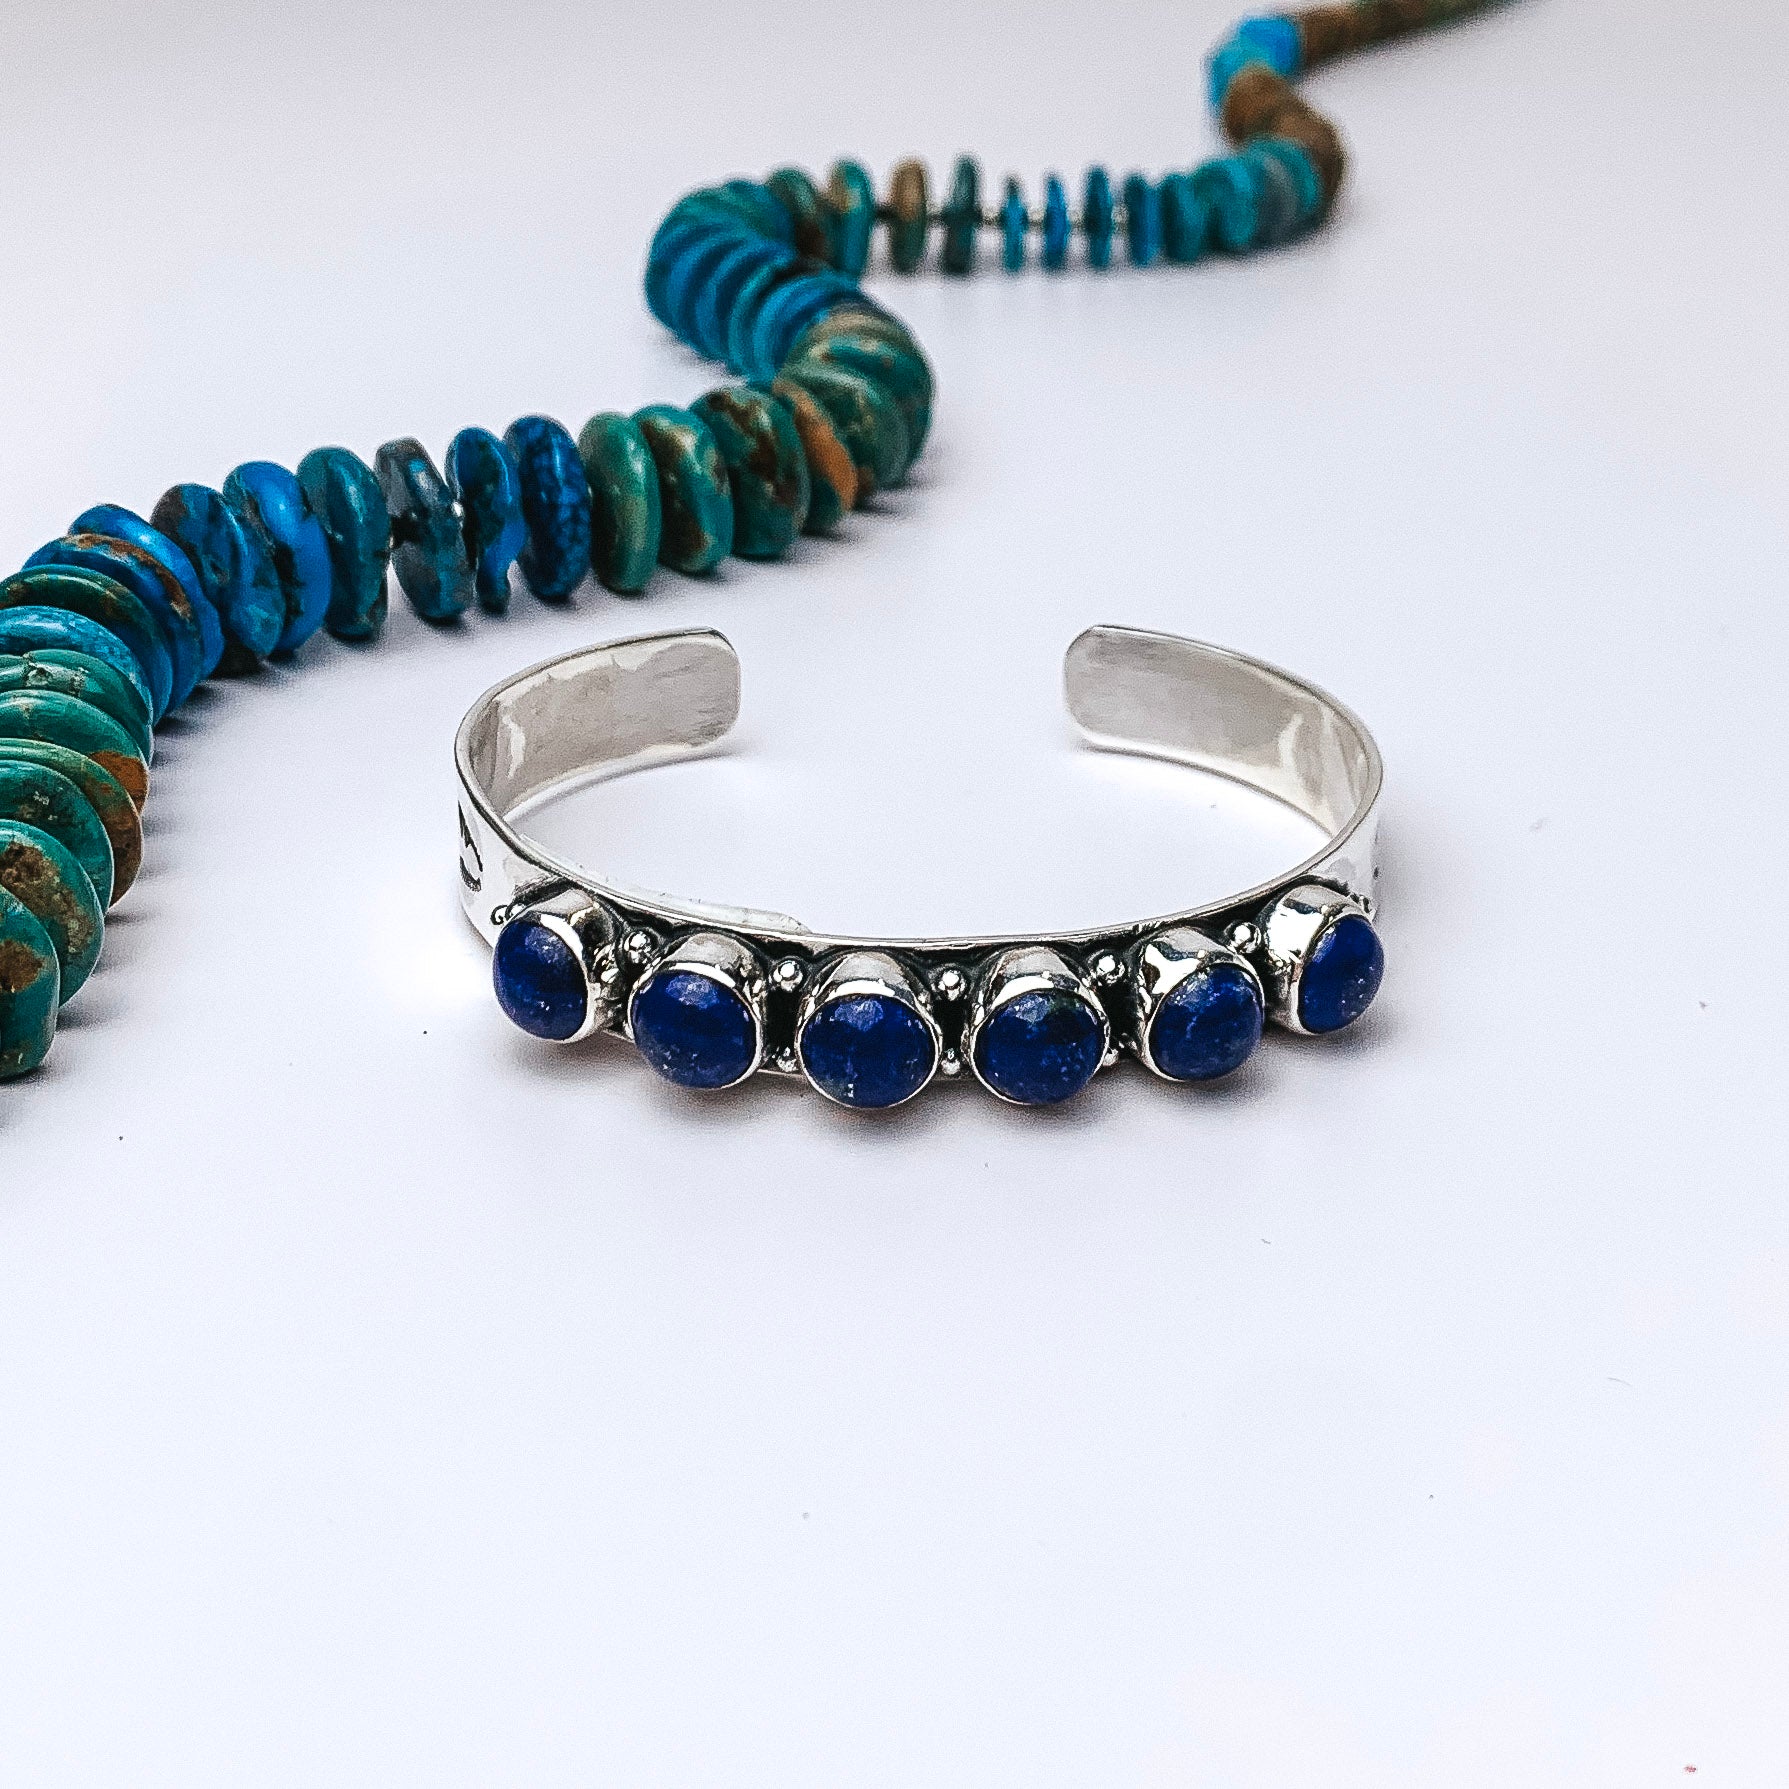 Centered in the picture is a sterling silver cuff with six dark lapis stones. Above the cuff is a turquoise necklace. All on a white background. 